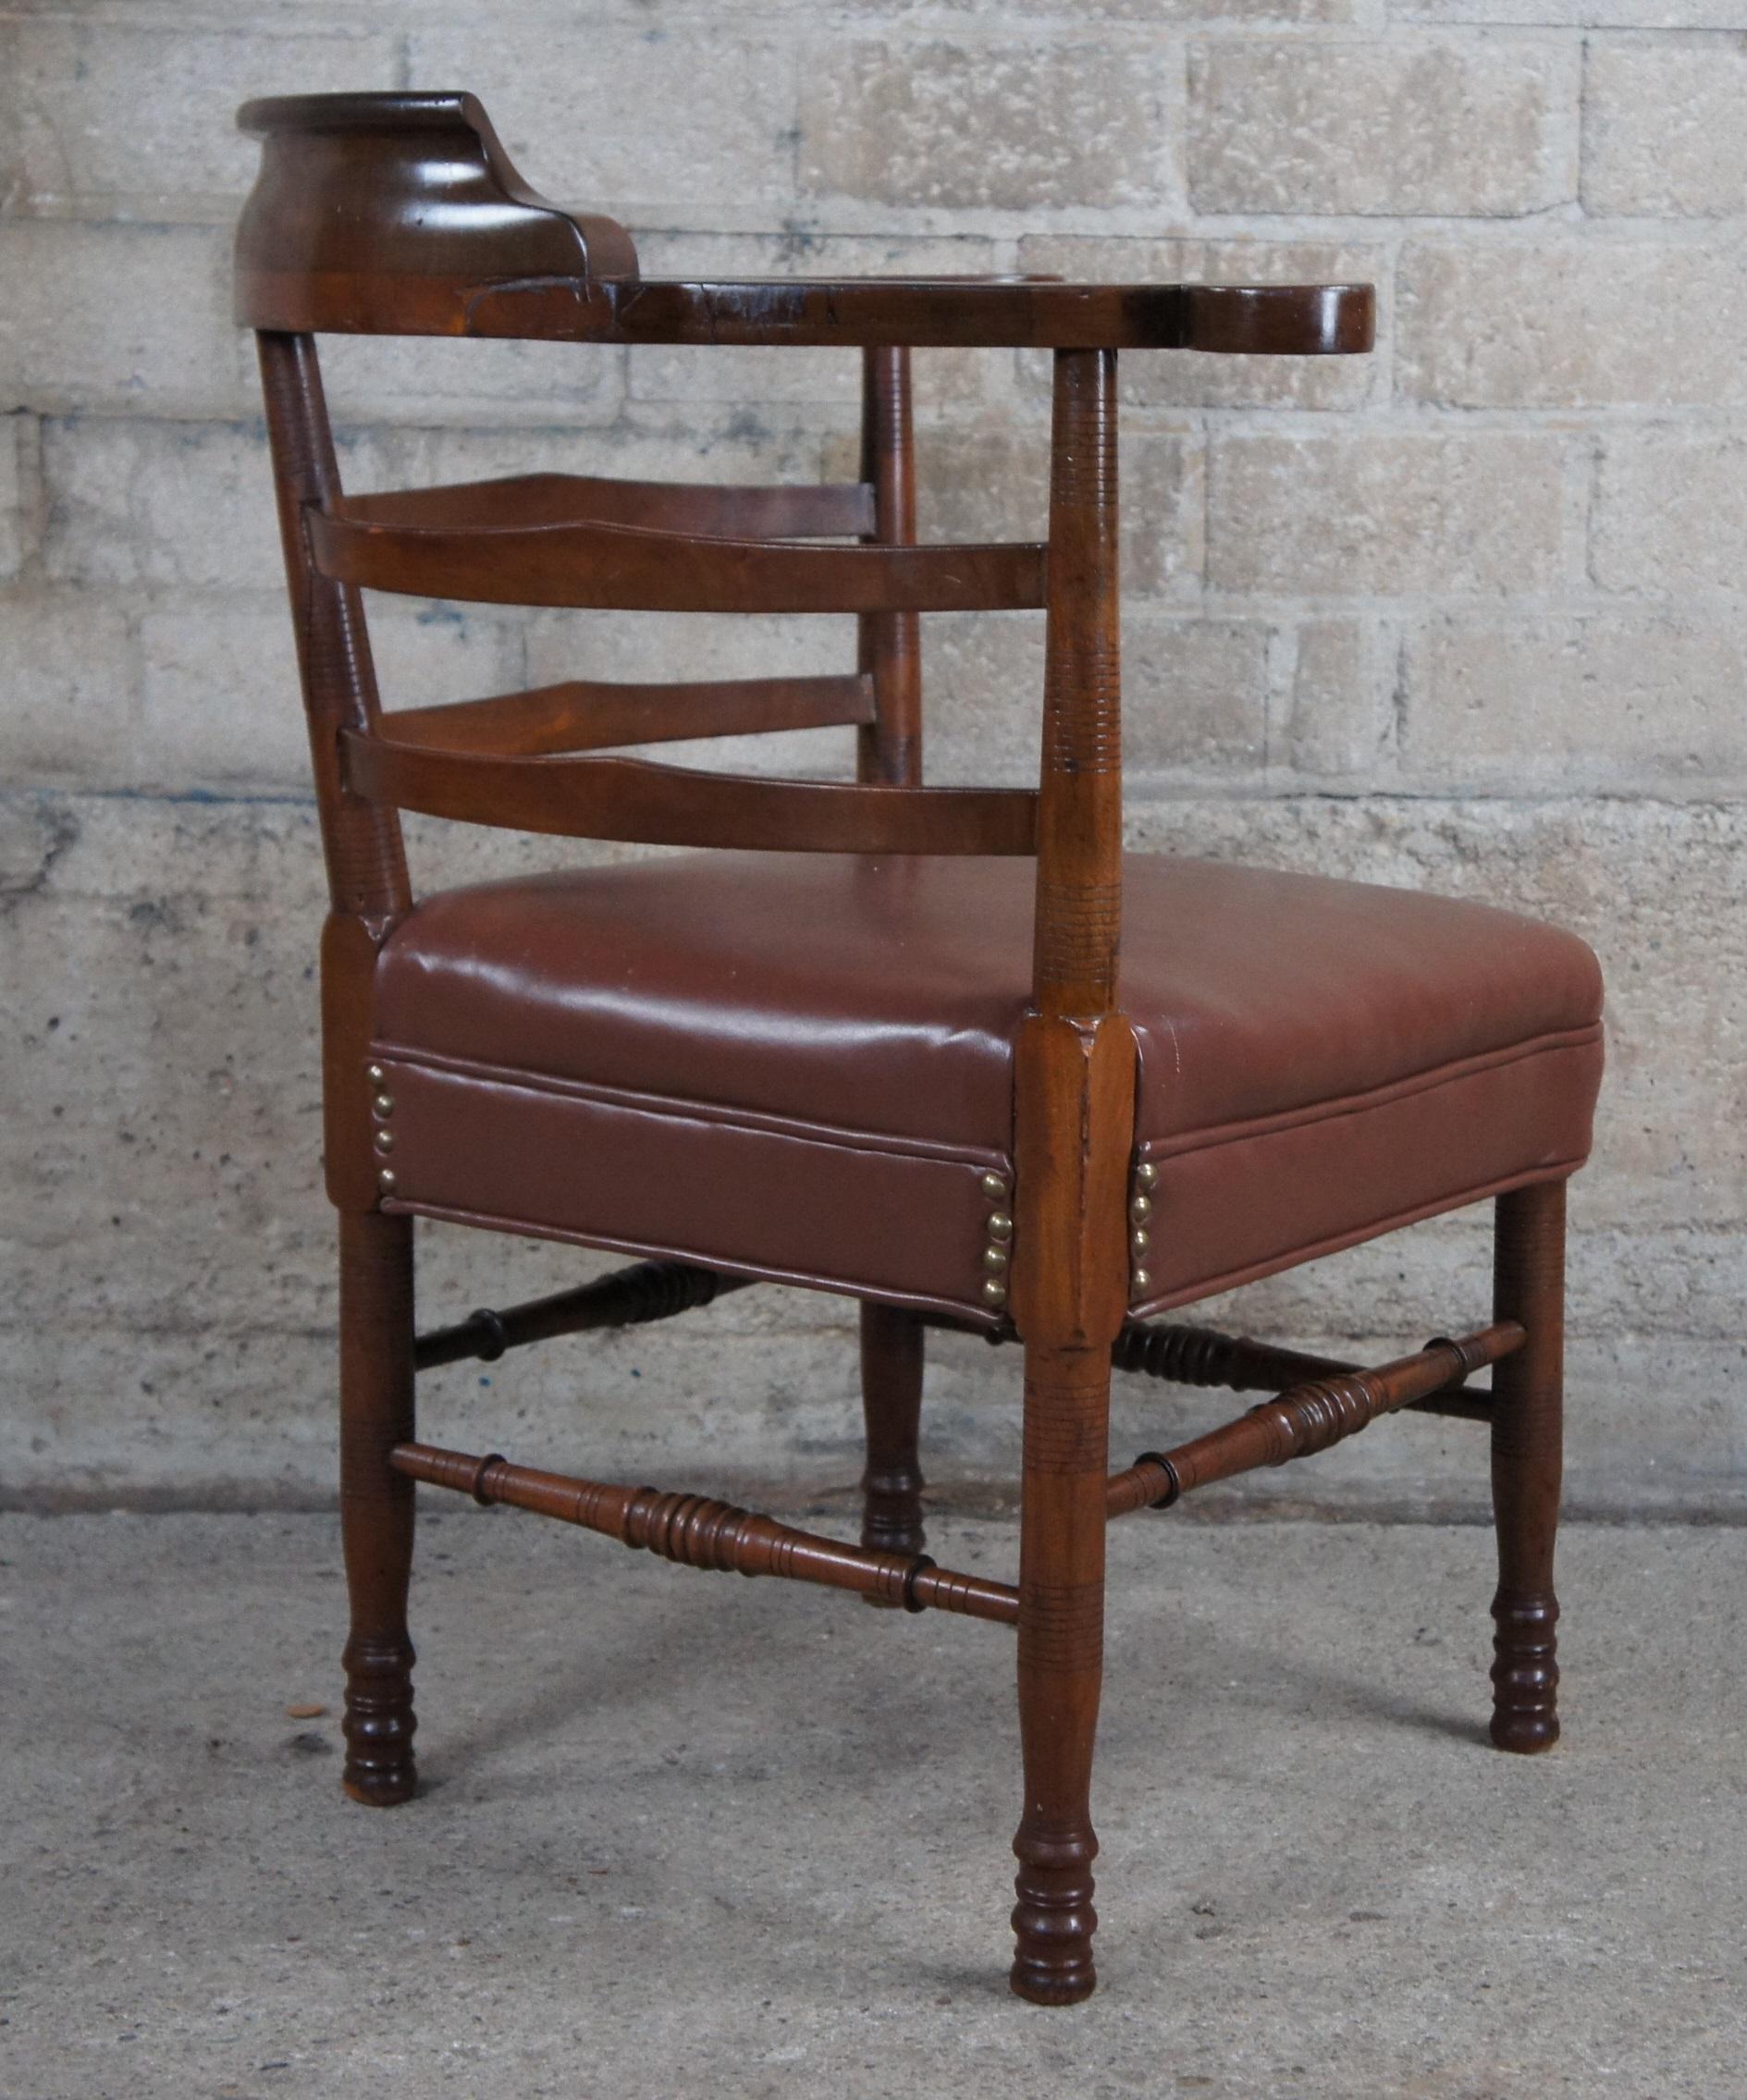 Upholstery Antique English Country Mahogany Ladderback Roundabout Corner Arm Chair Seat For Sale